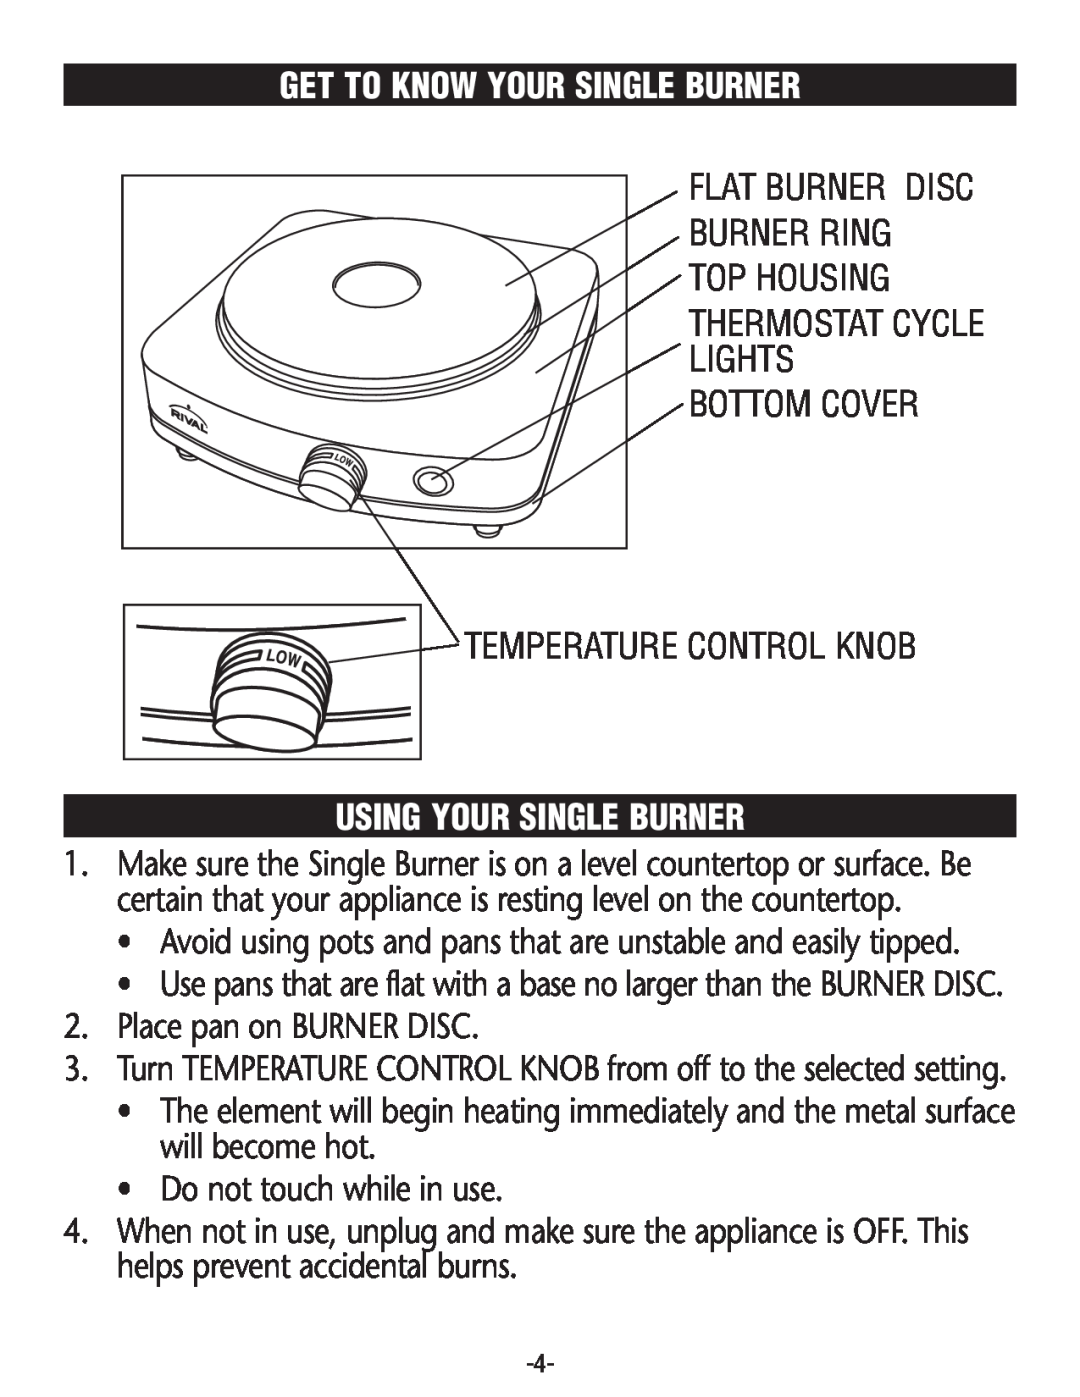 Rival SB150 manual Get To Know Your Single Burner, Using Your Single Burner 